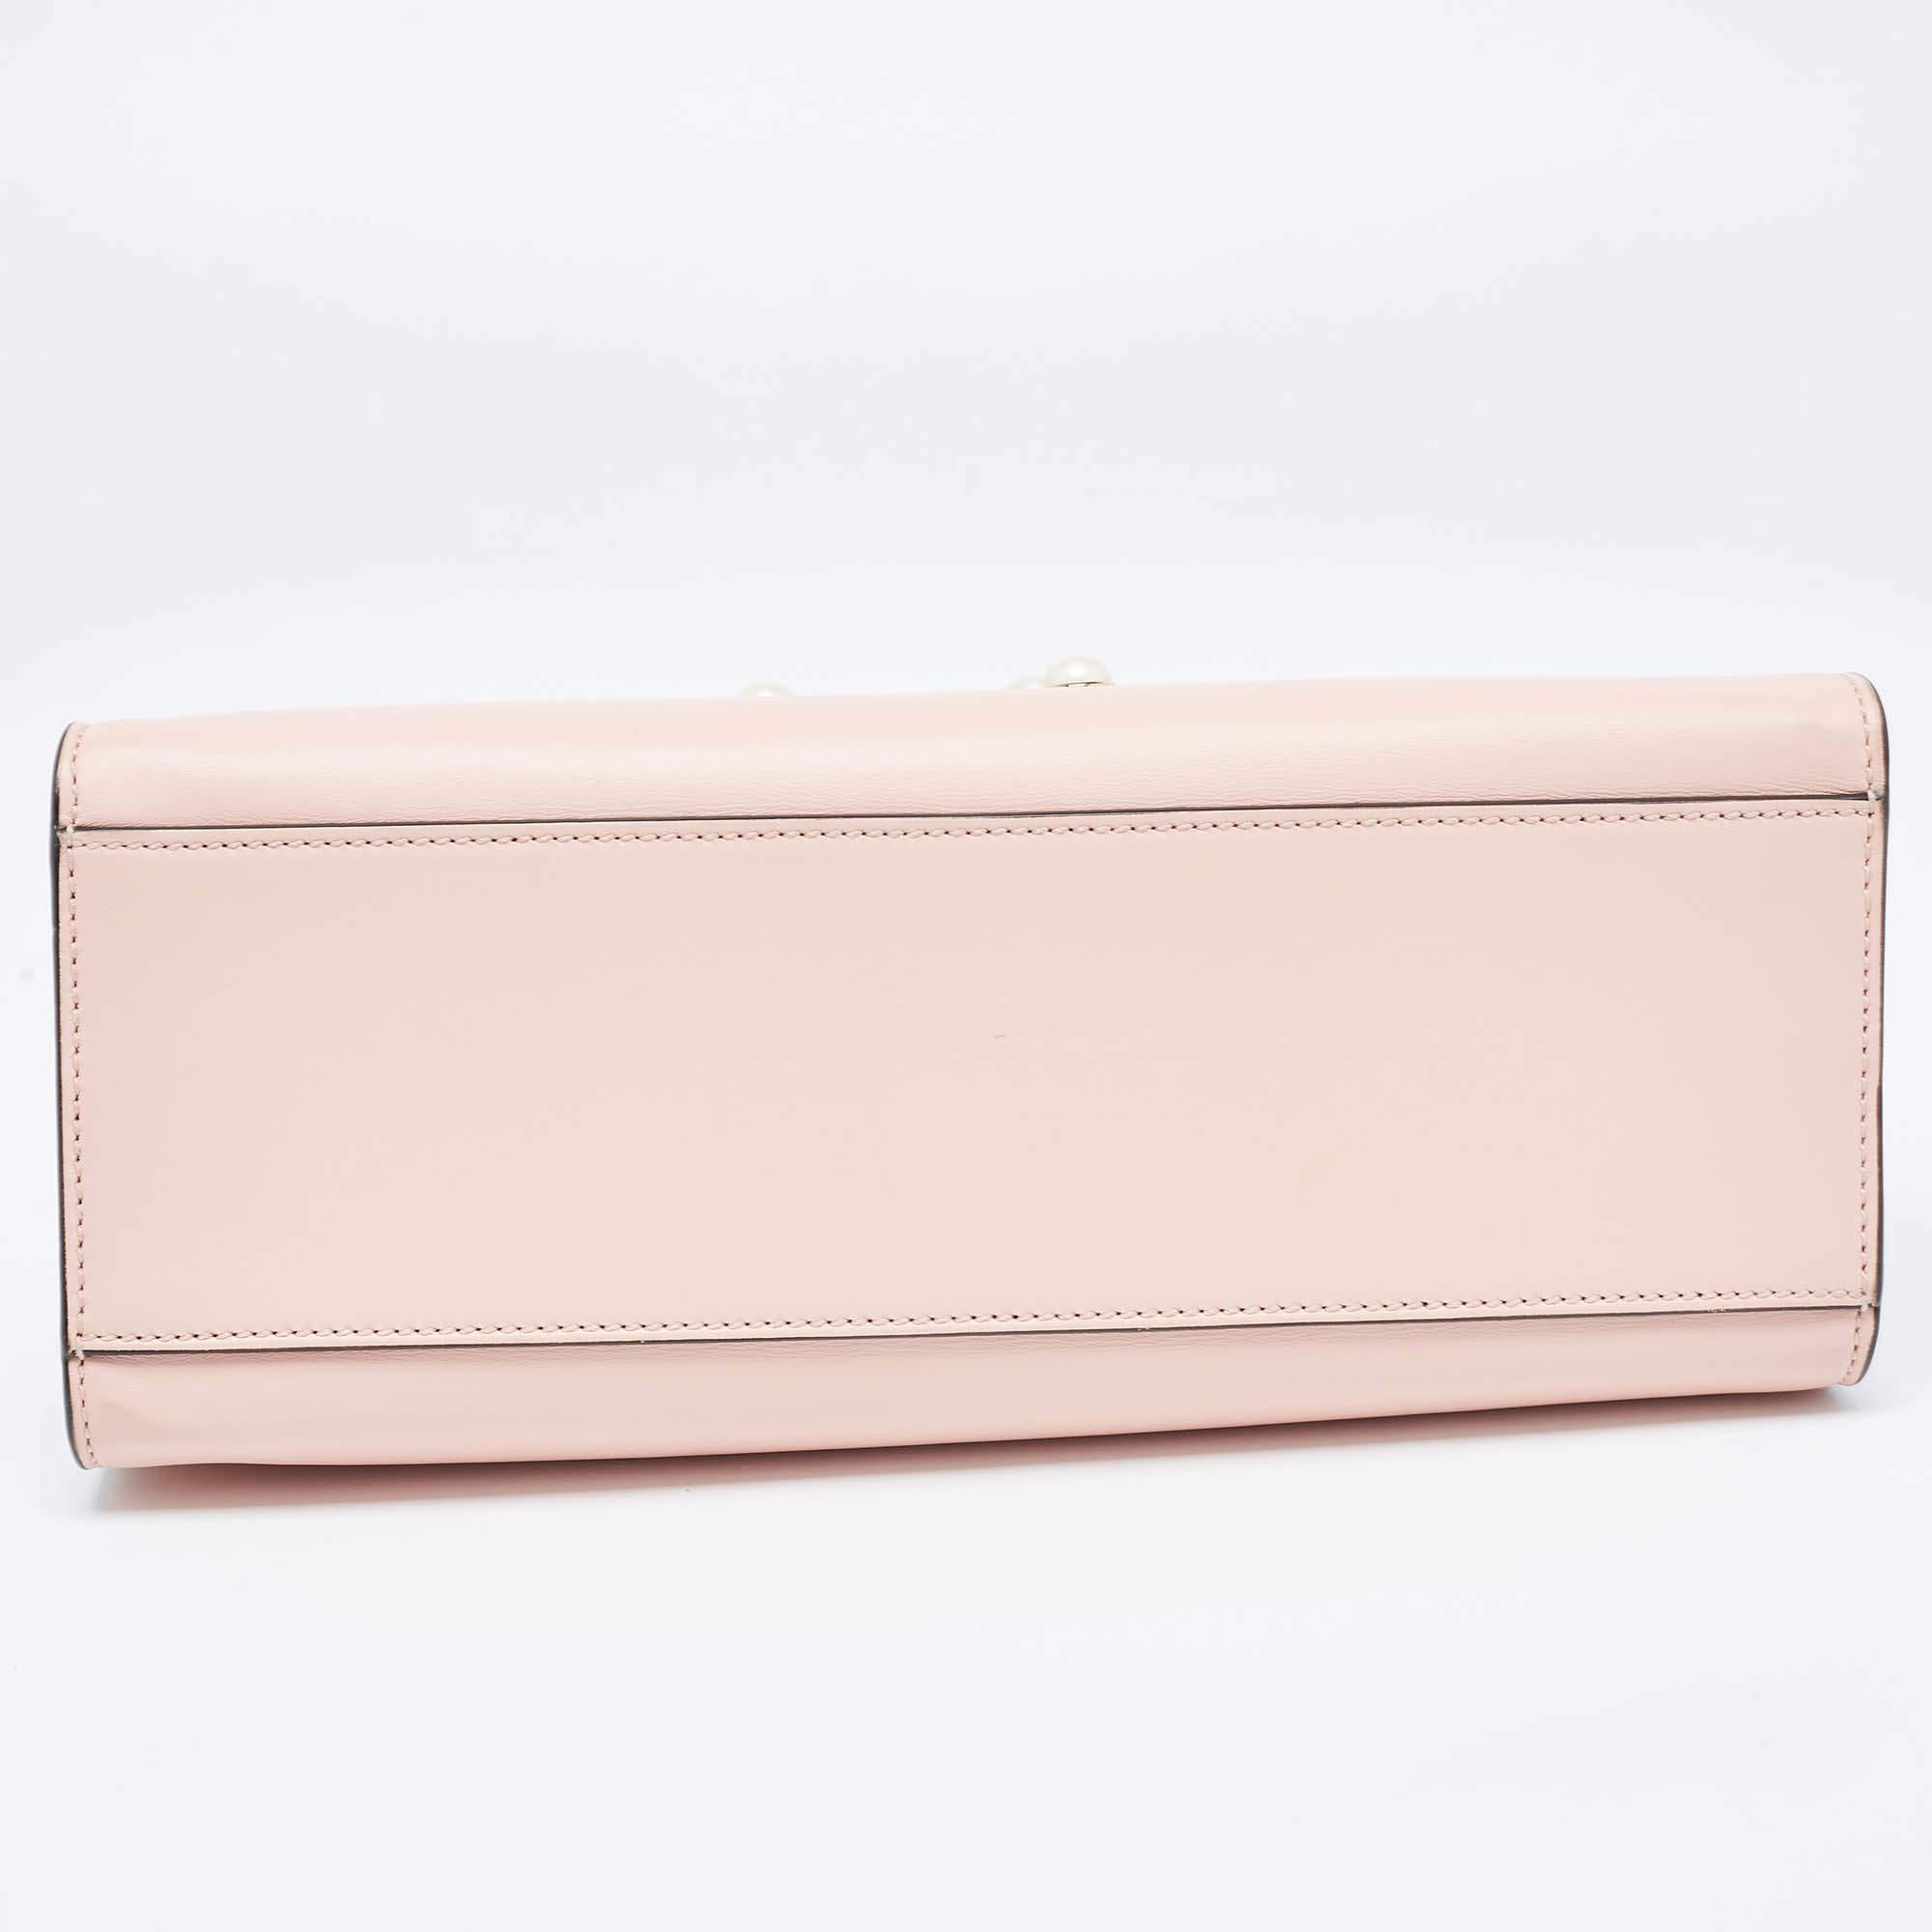 Gucci Pink/White Leather Small Bamboo Buckle Tote 6